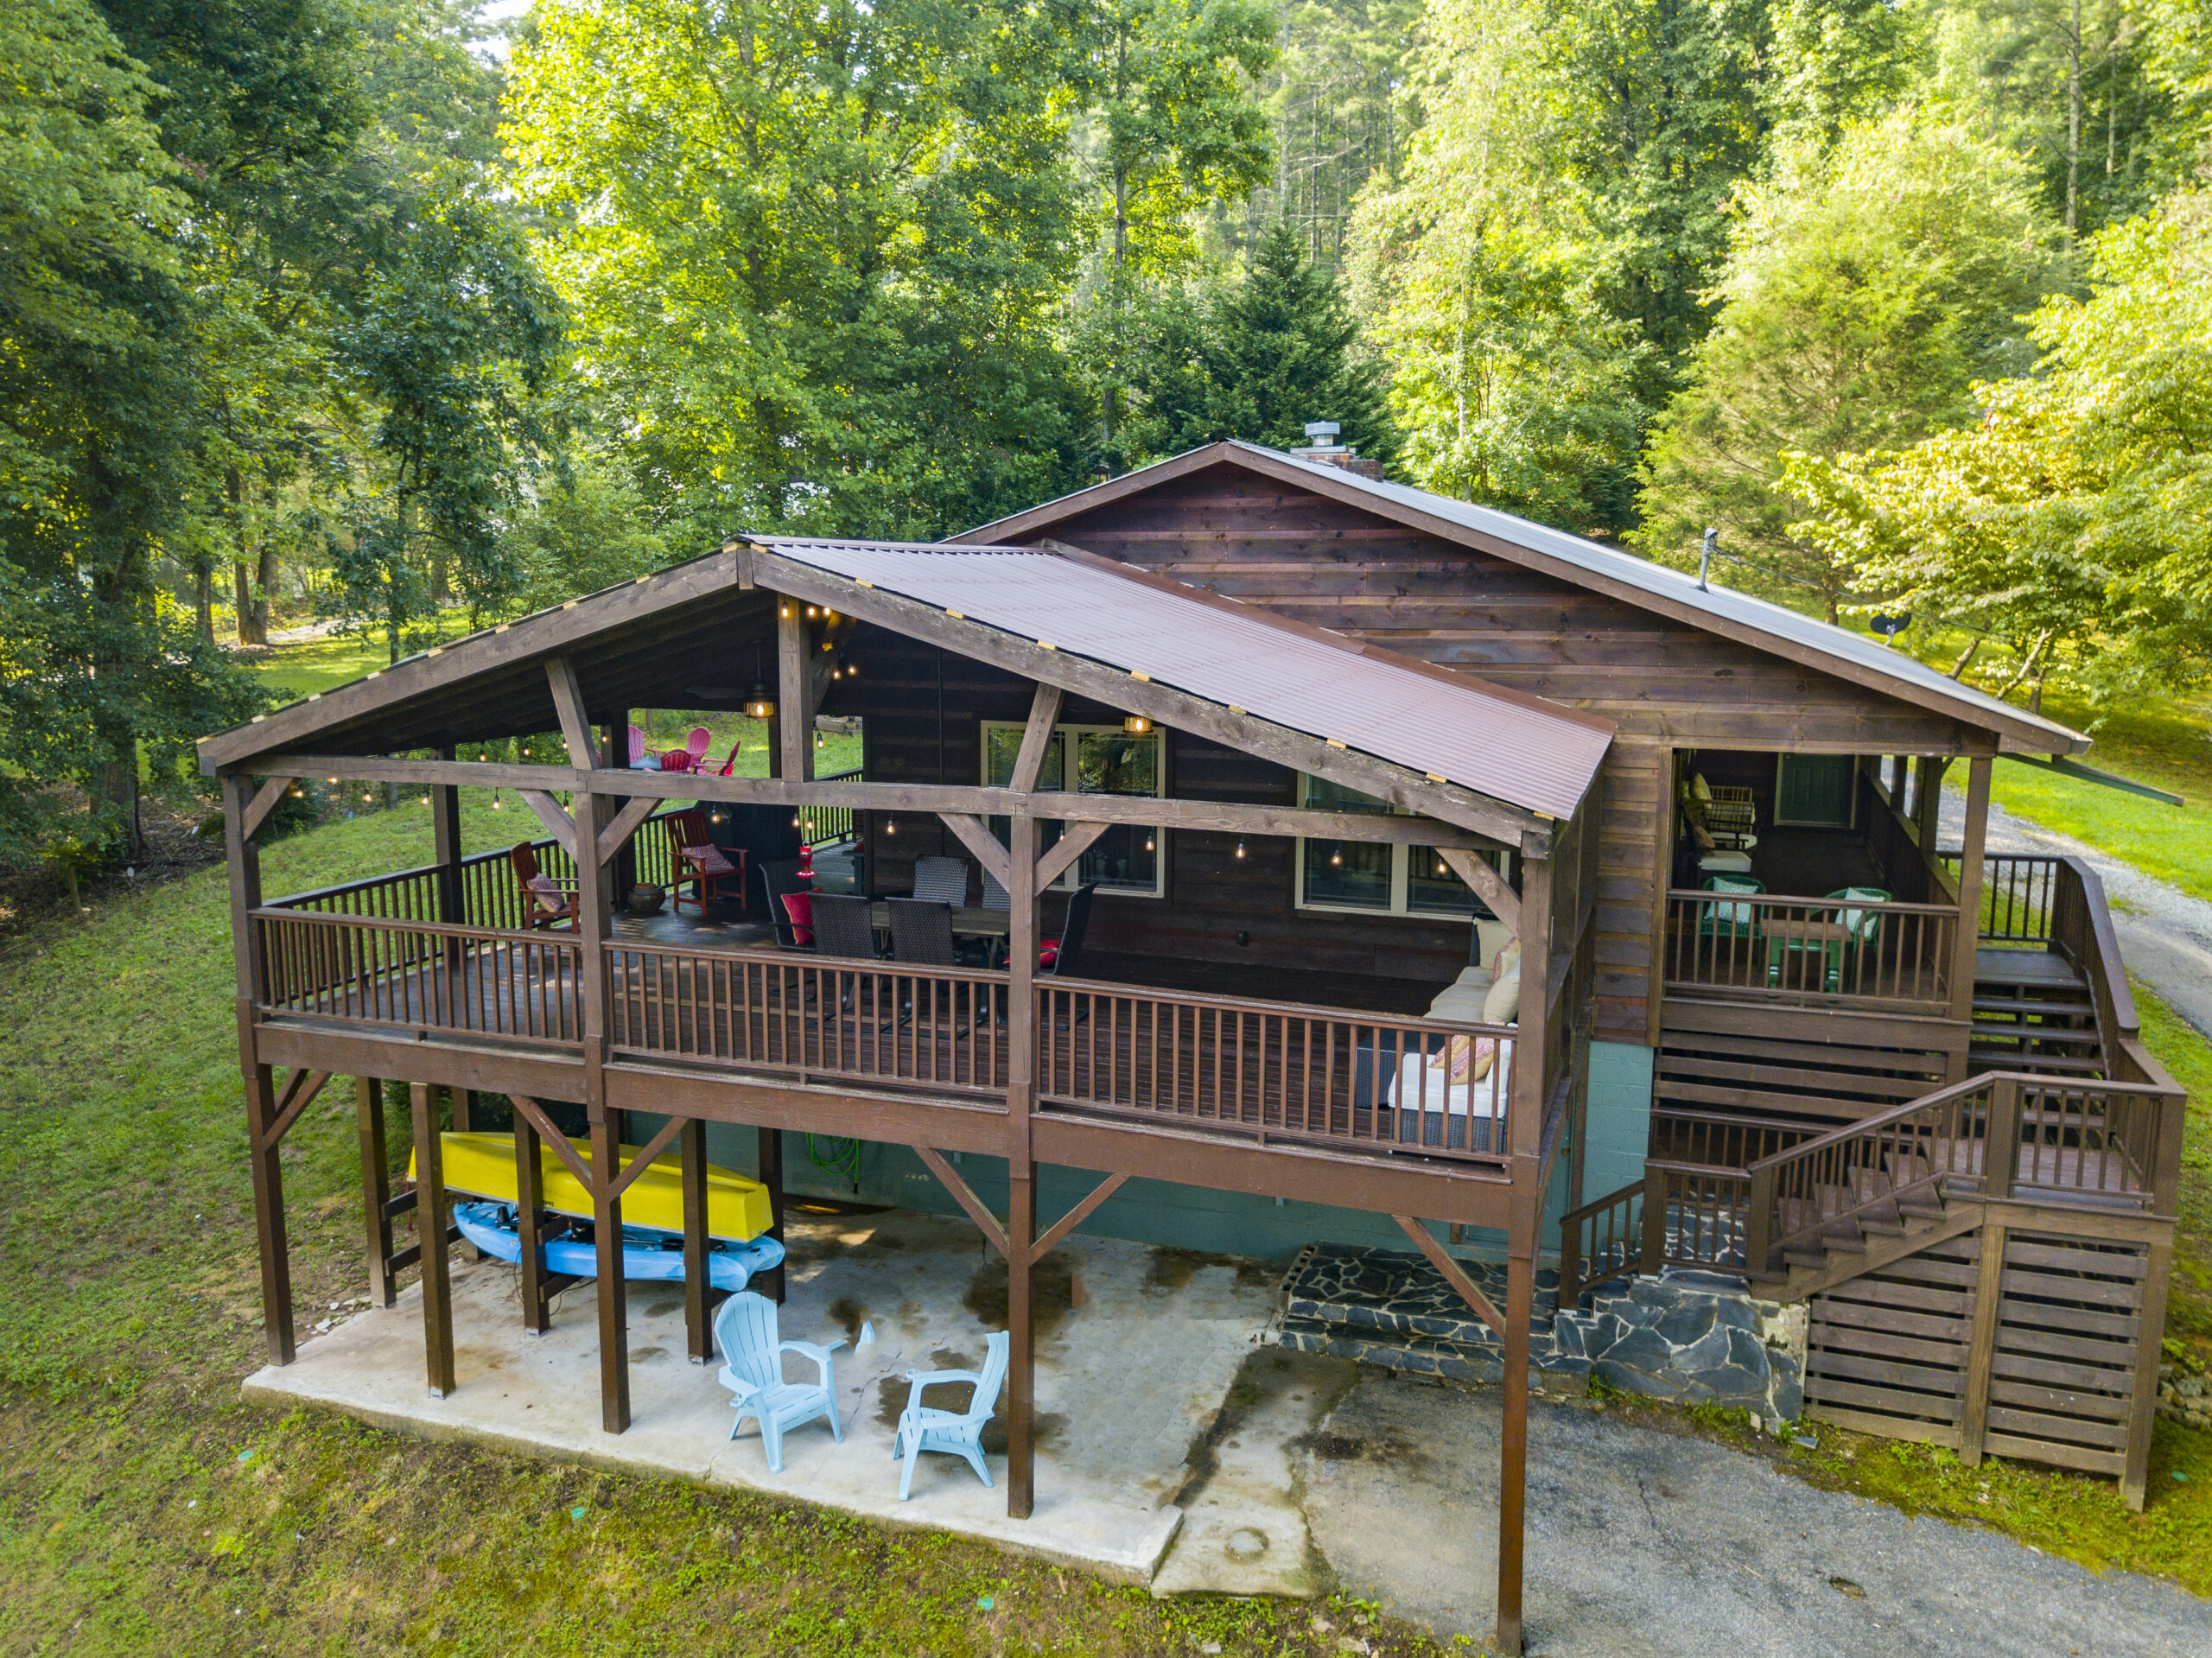 Moon Tower Cabin is a 3 bedroom 2 bath cabin with a Game Room, Fire Pit, and Nice little lake frontage. Large covered porch for relaxing and enjoying the views. Relax in the Beautiful North Georgia Mountains at the nice cabin.